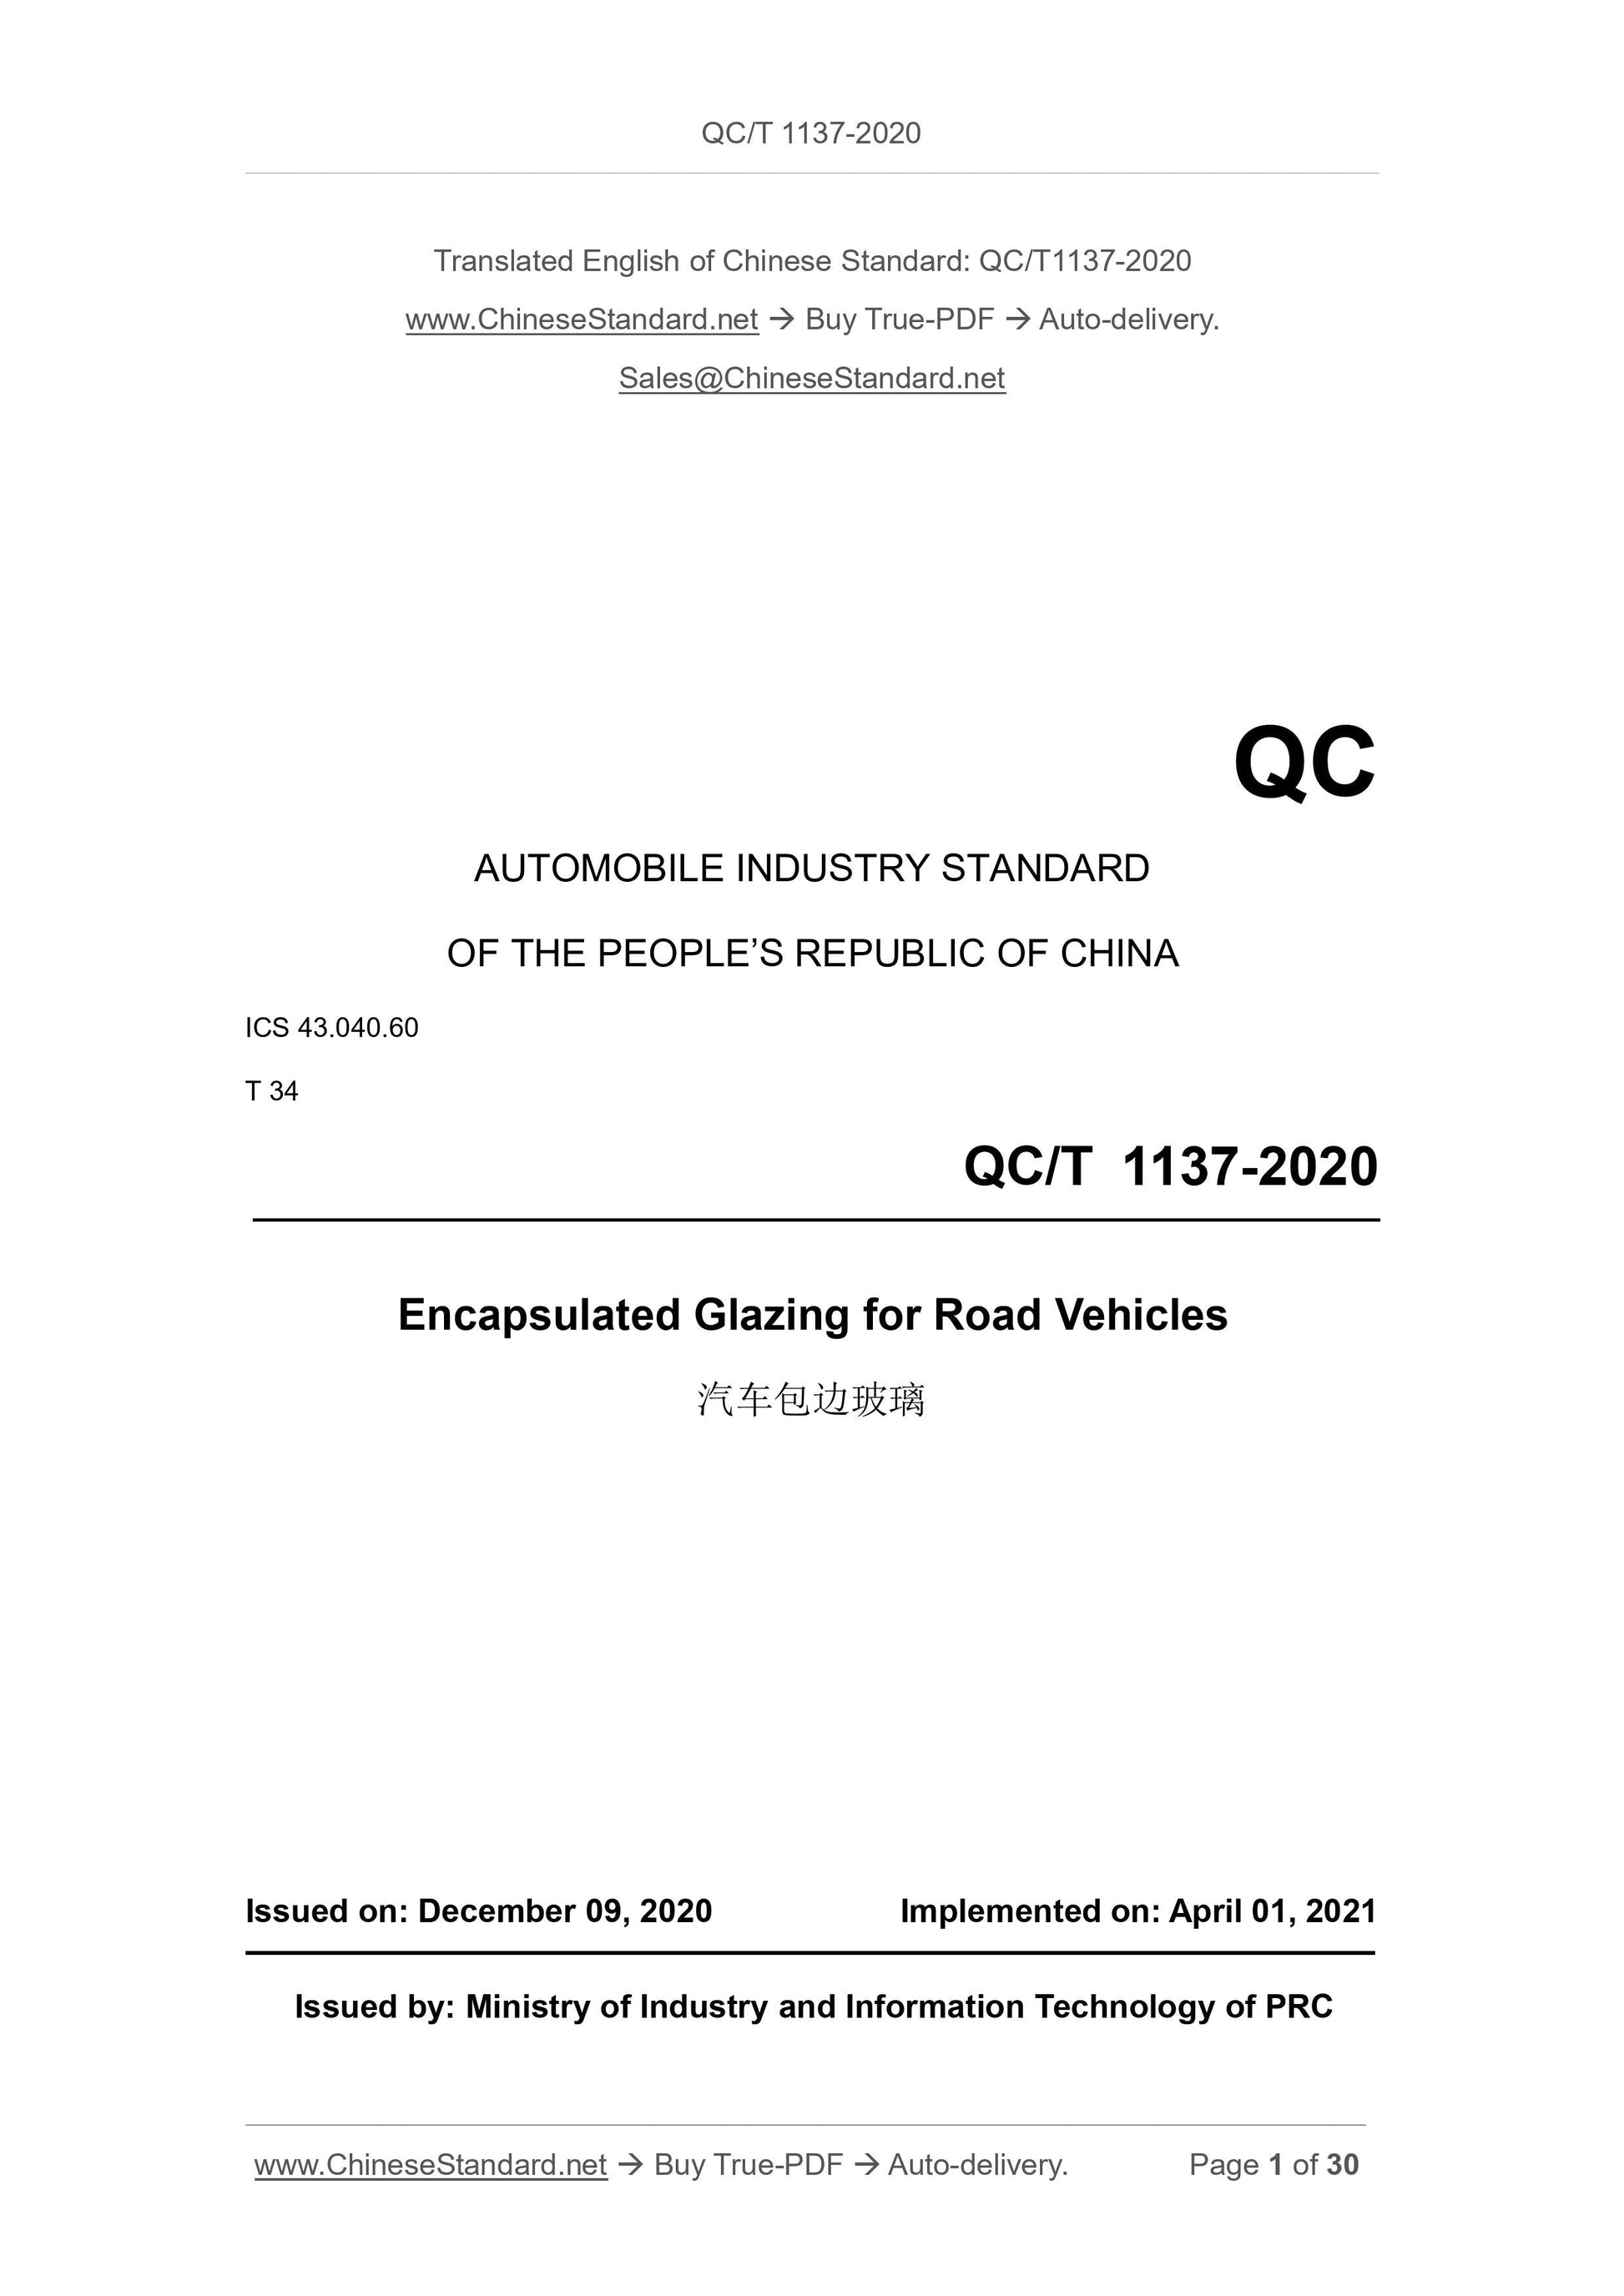 QC/T 1137-2020 Page 1